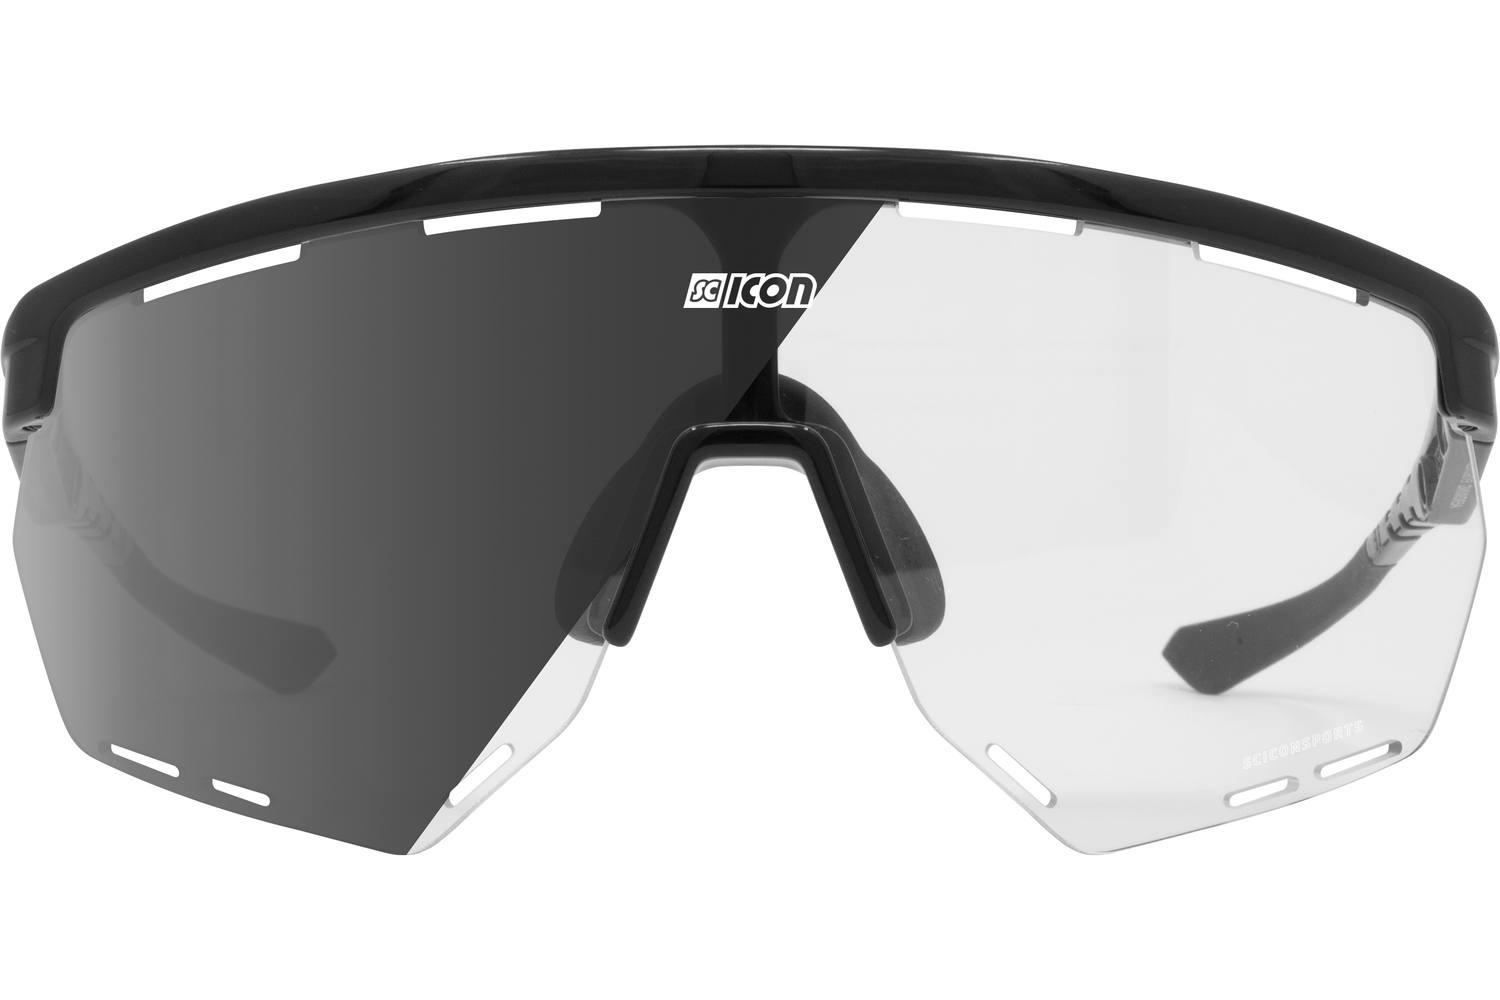 Scicon Aerowing Black Gloss Cycling Glasses | Order with DISCOUNT!